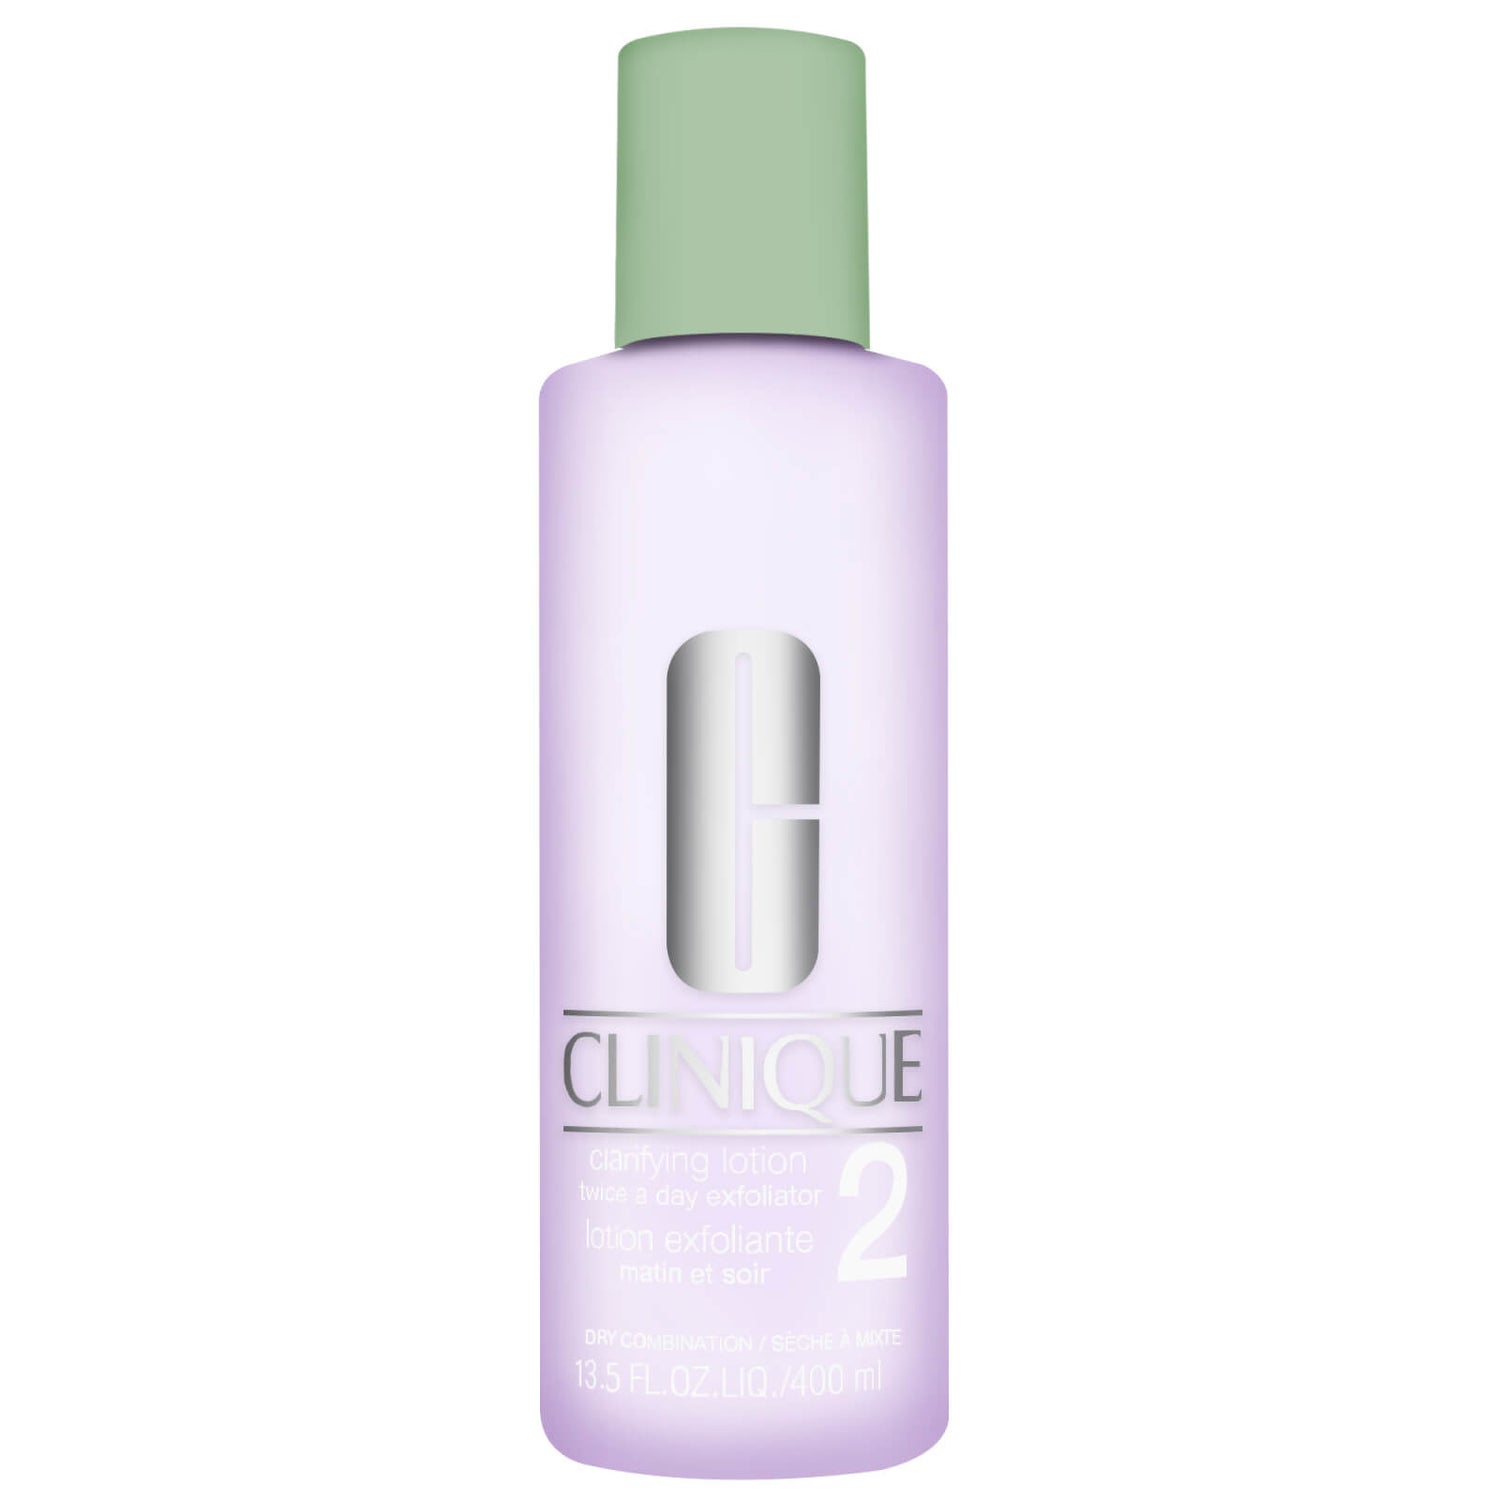 Clinique Cleansers & Makeup Removers Lotion Twice A Day Exfoliator 2 for Dry and Combination Skin 400ml 13.5 fl.oz. - allbeauty